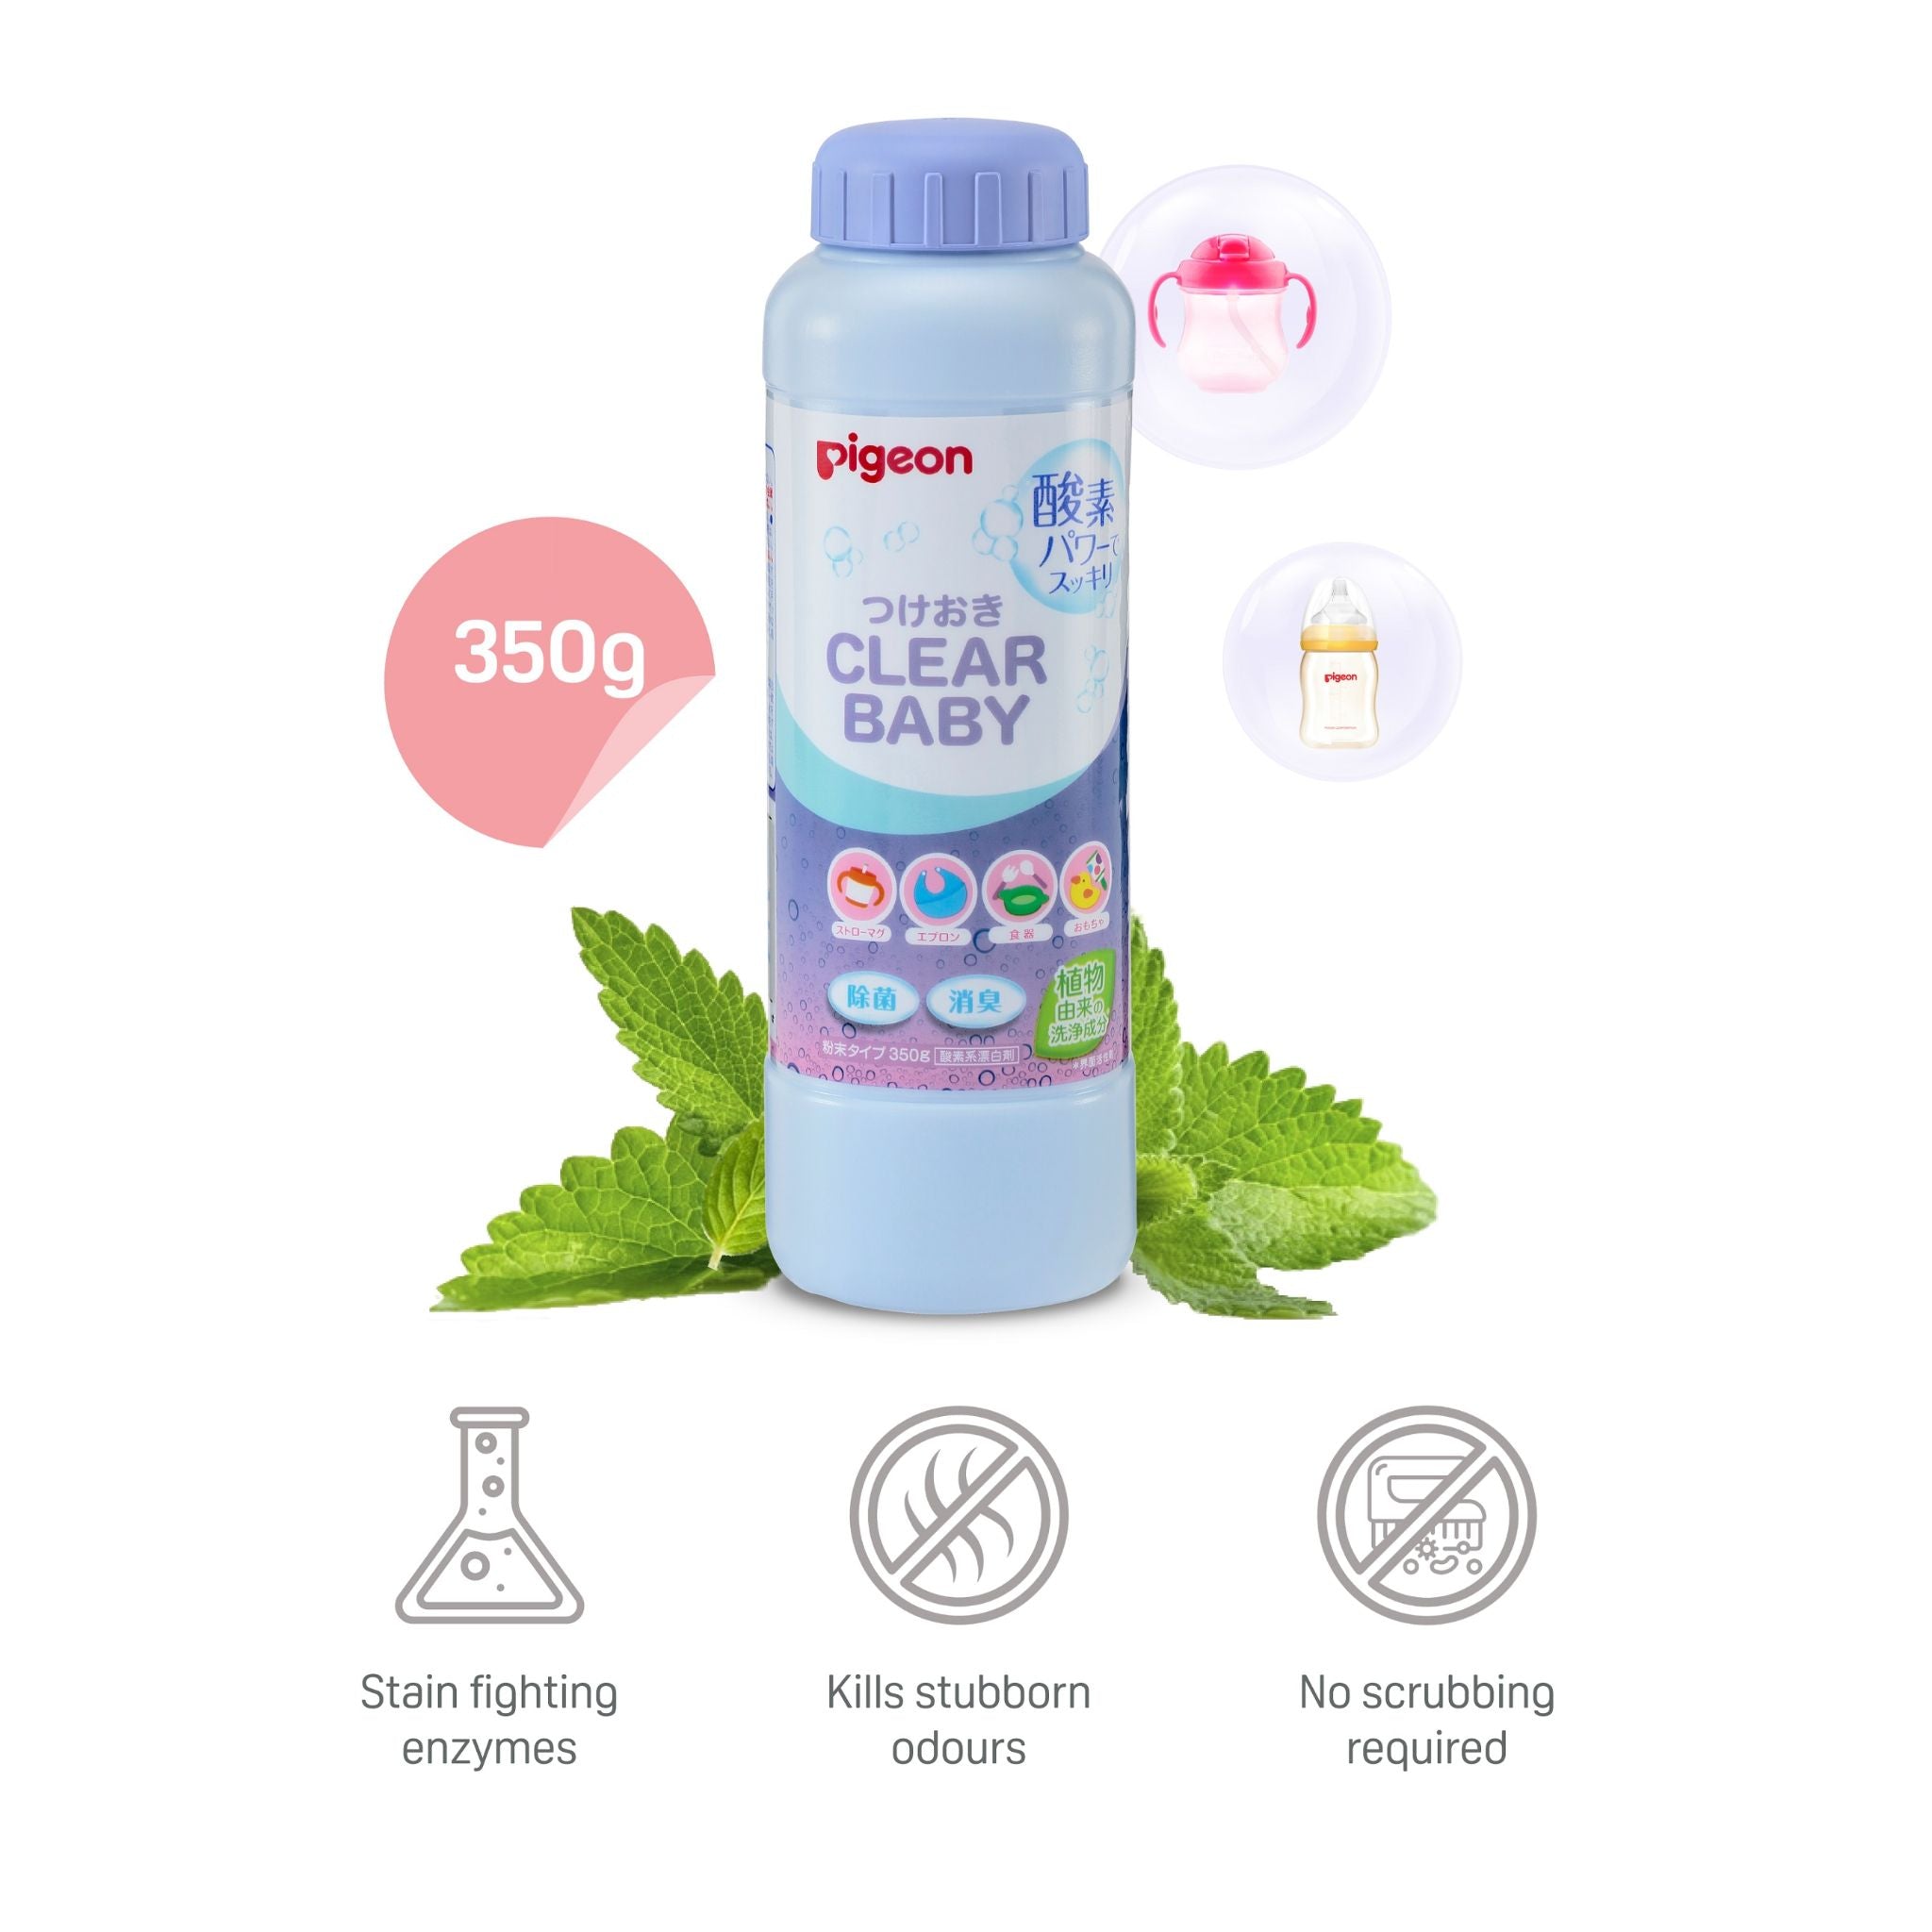 Pigeon Clearbaby Soak and Wash Powder 350g